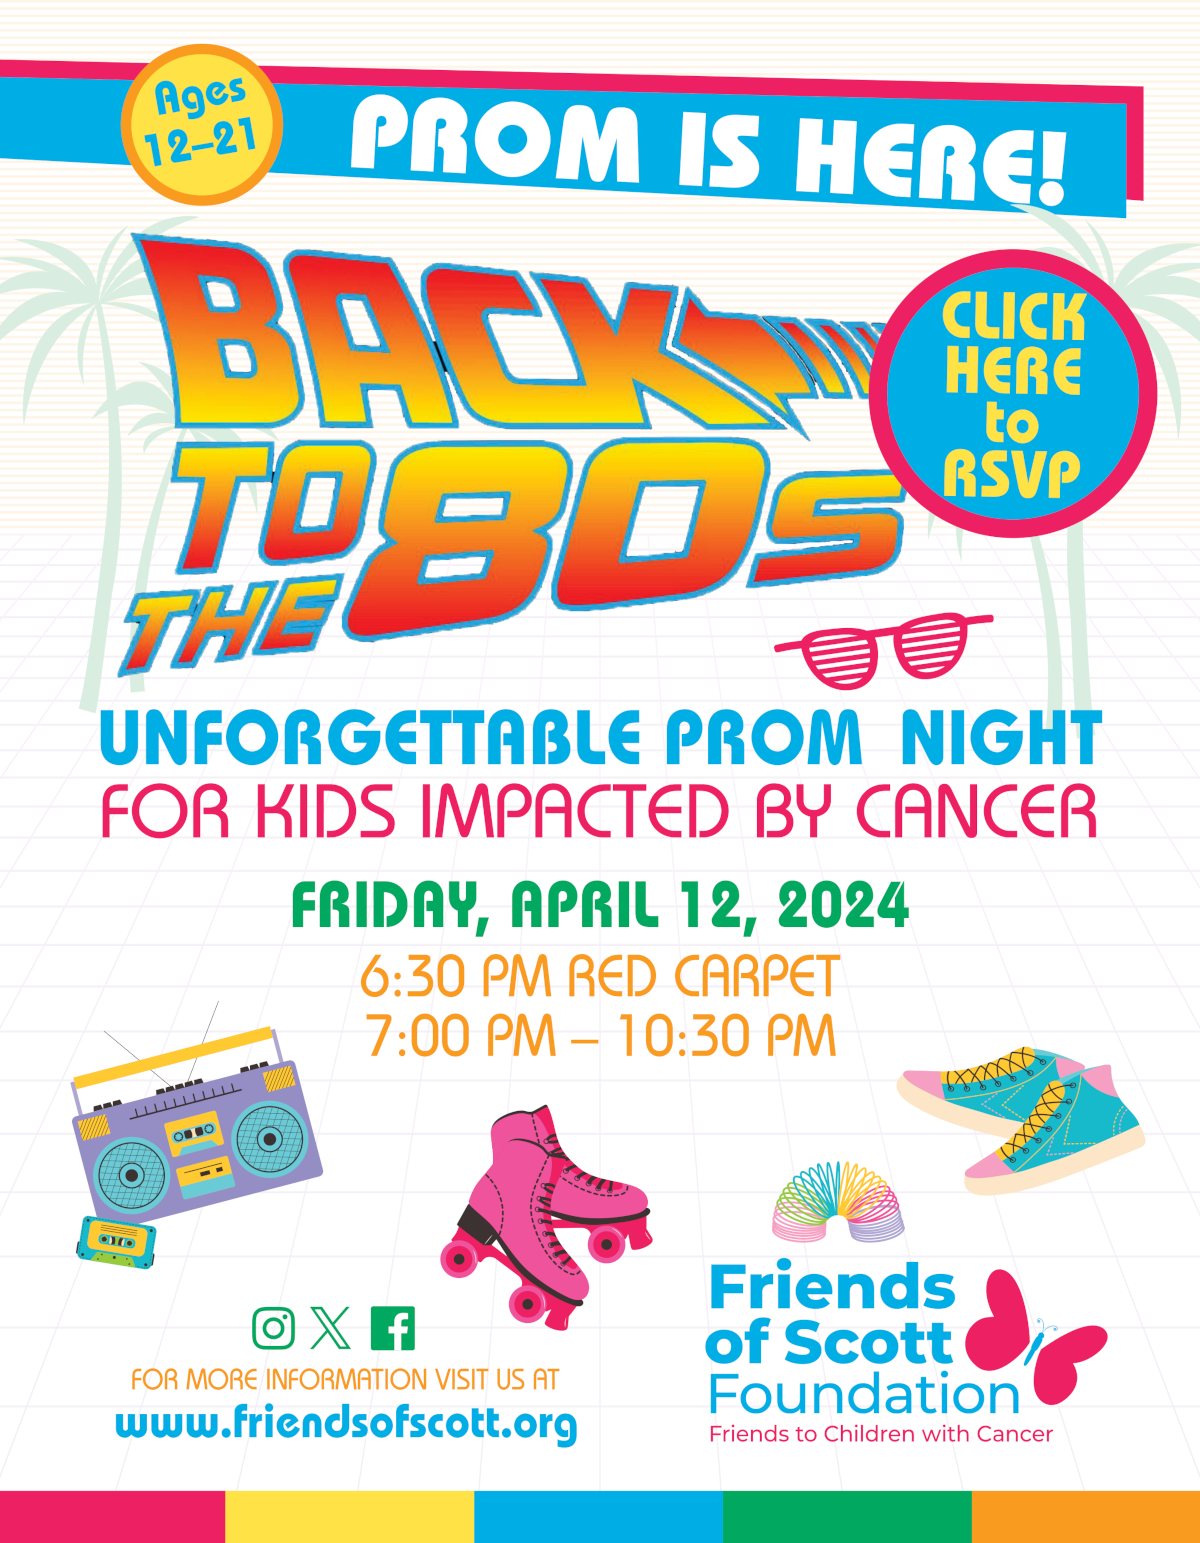 Prom 80s is Here!